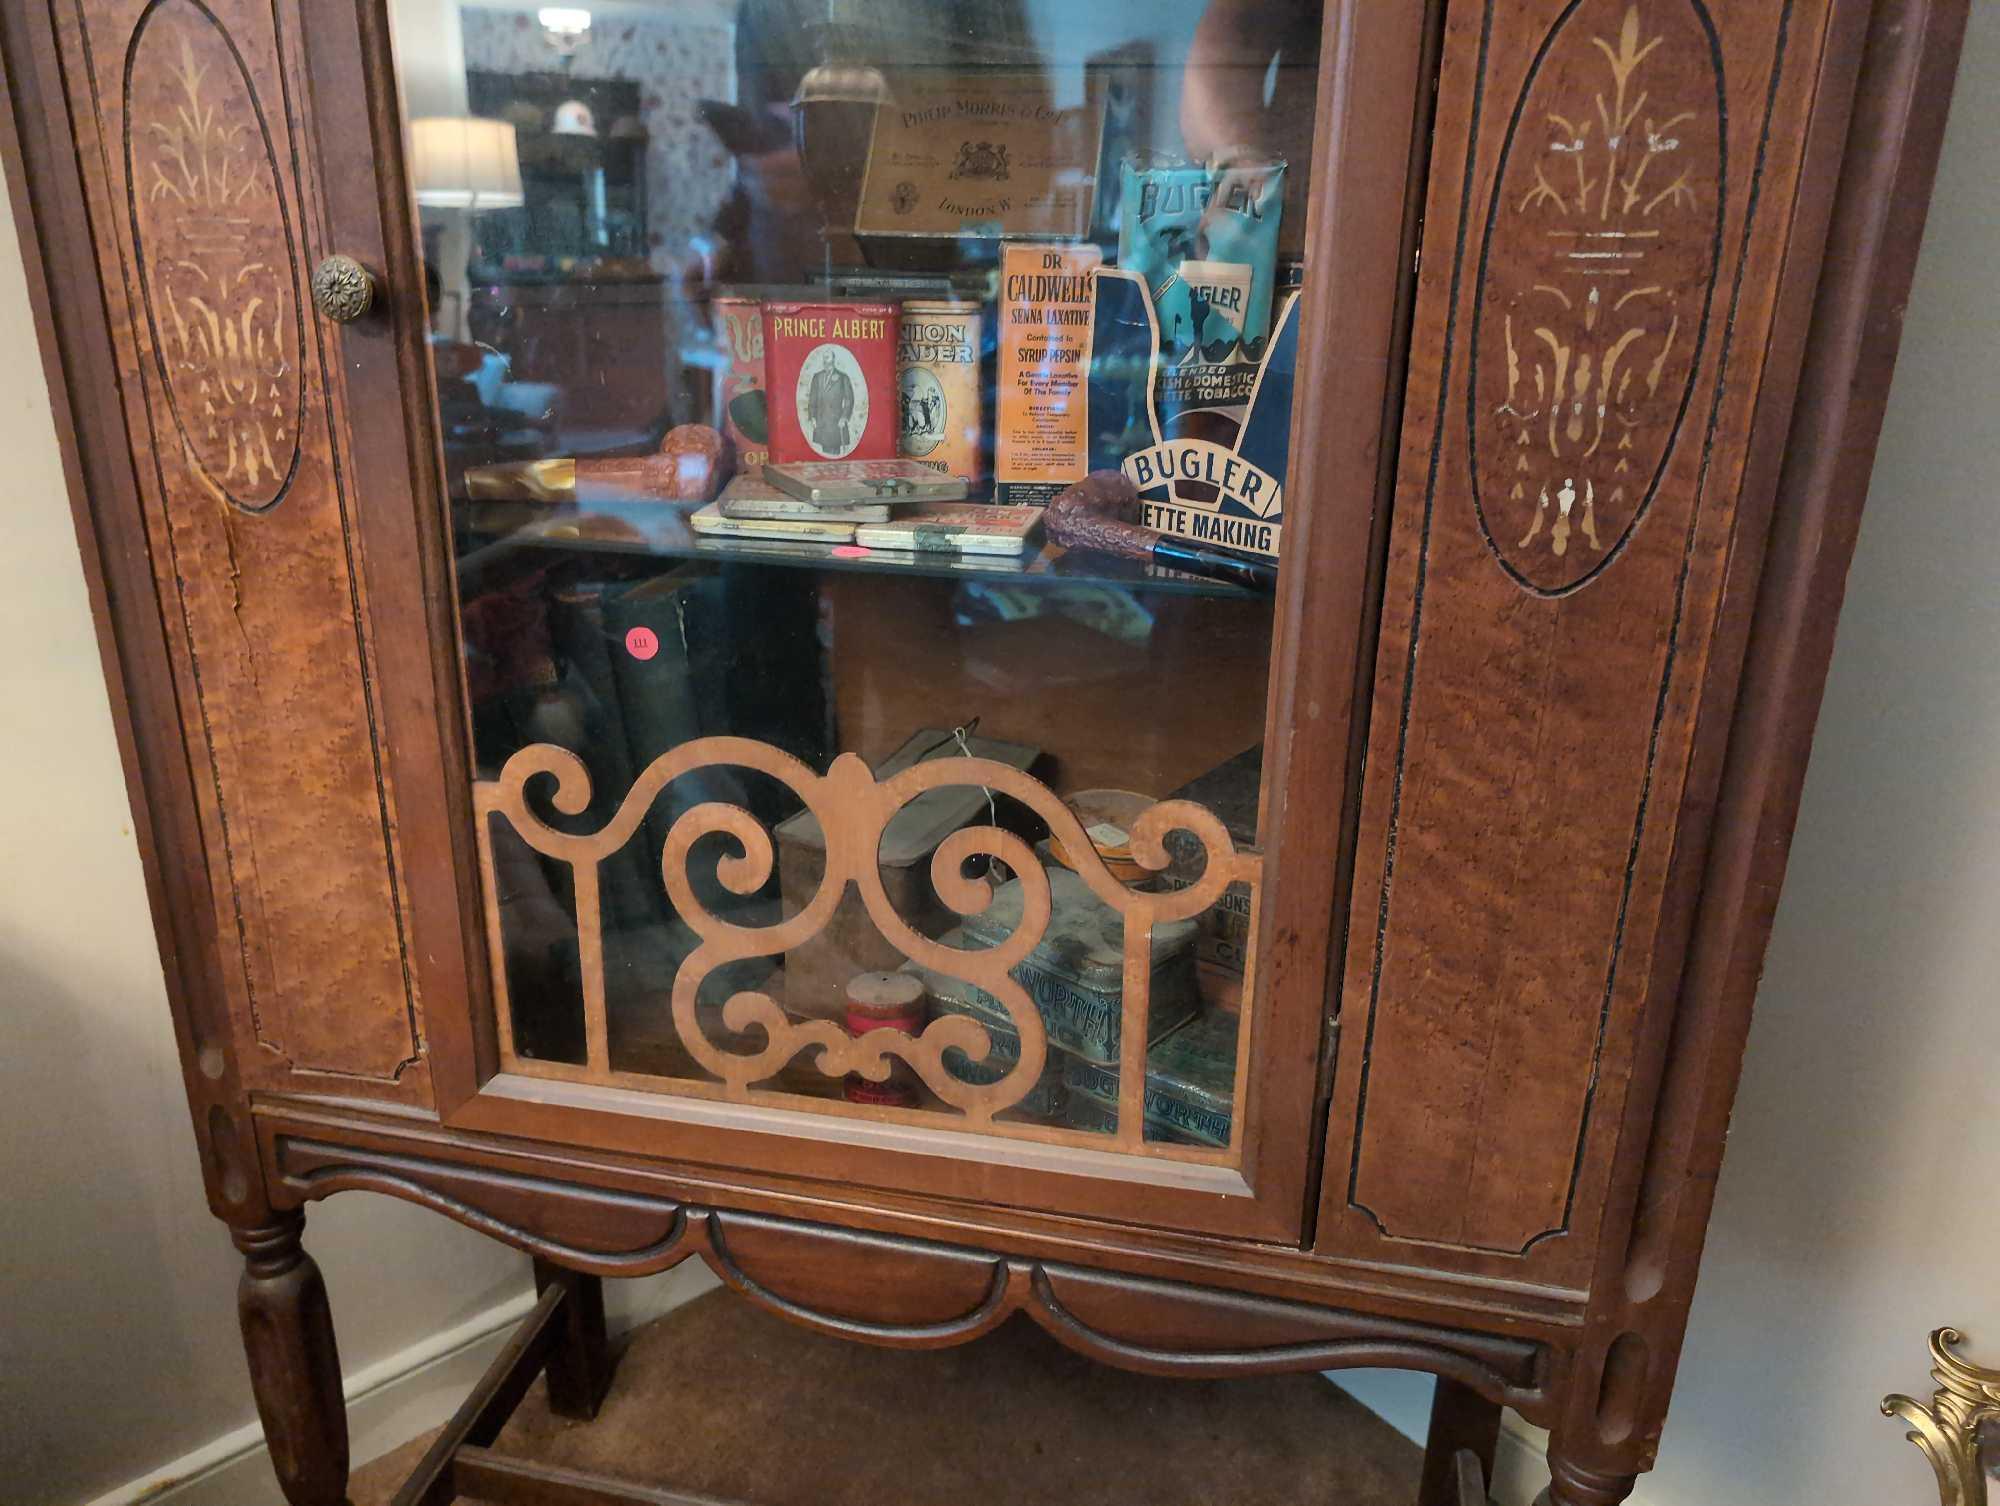 (LR) ANTIQUE WOOD GLASS FRONT CHINA CABINET WITH CROSS STRETCHER BASE, INLAID DETAILS, VENEER SCROLL